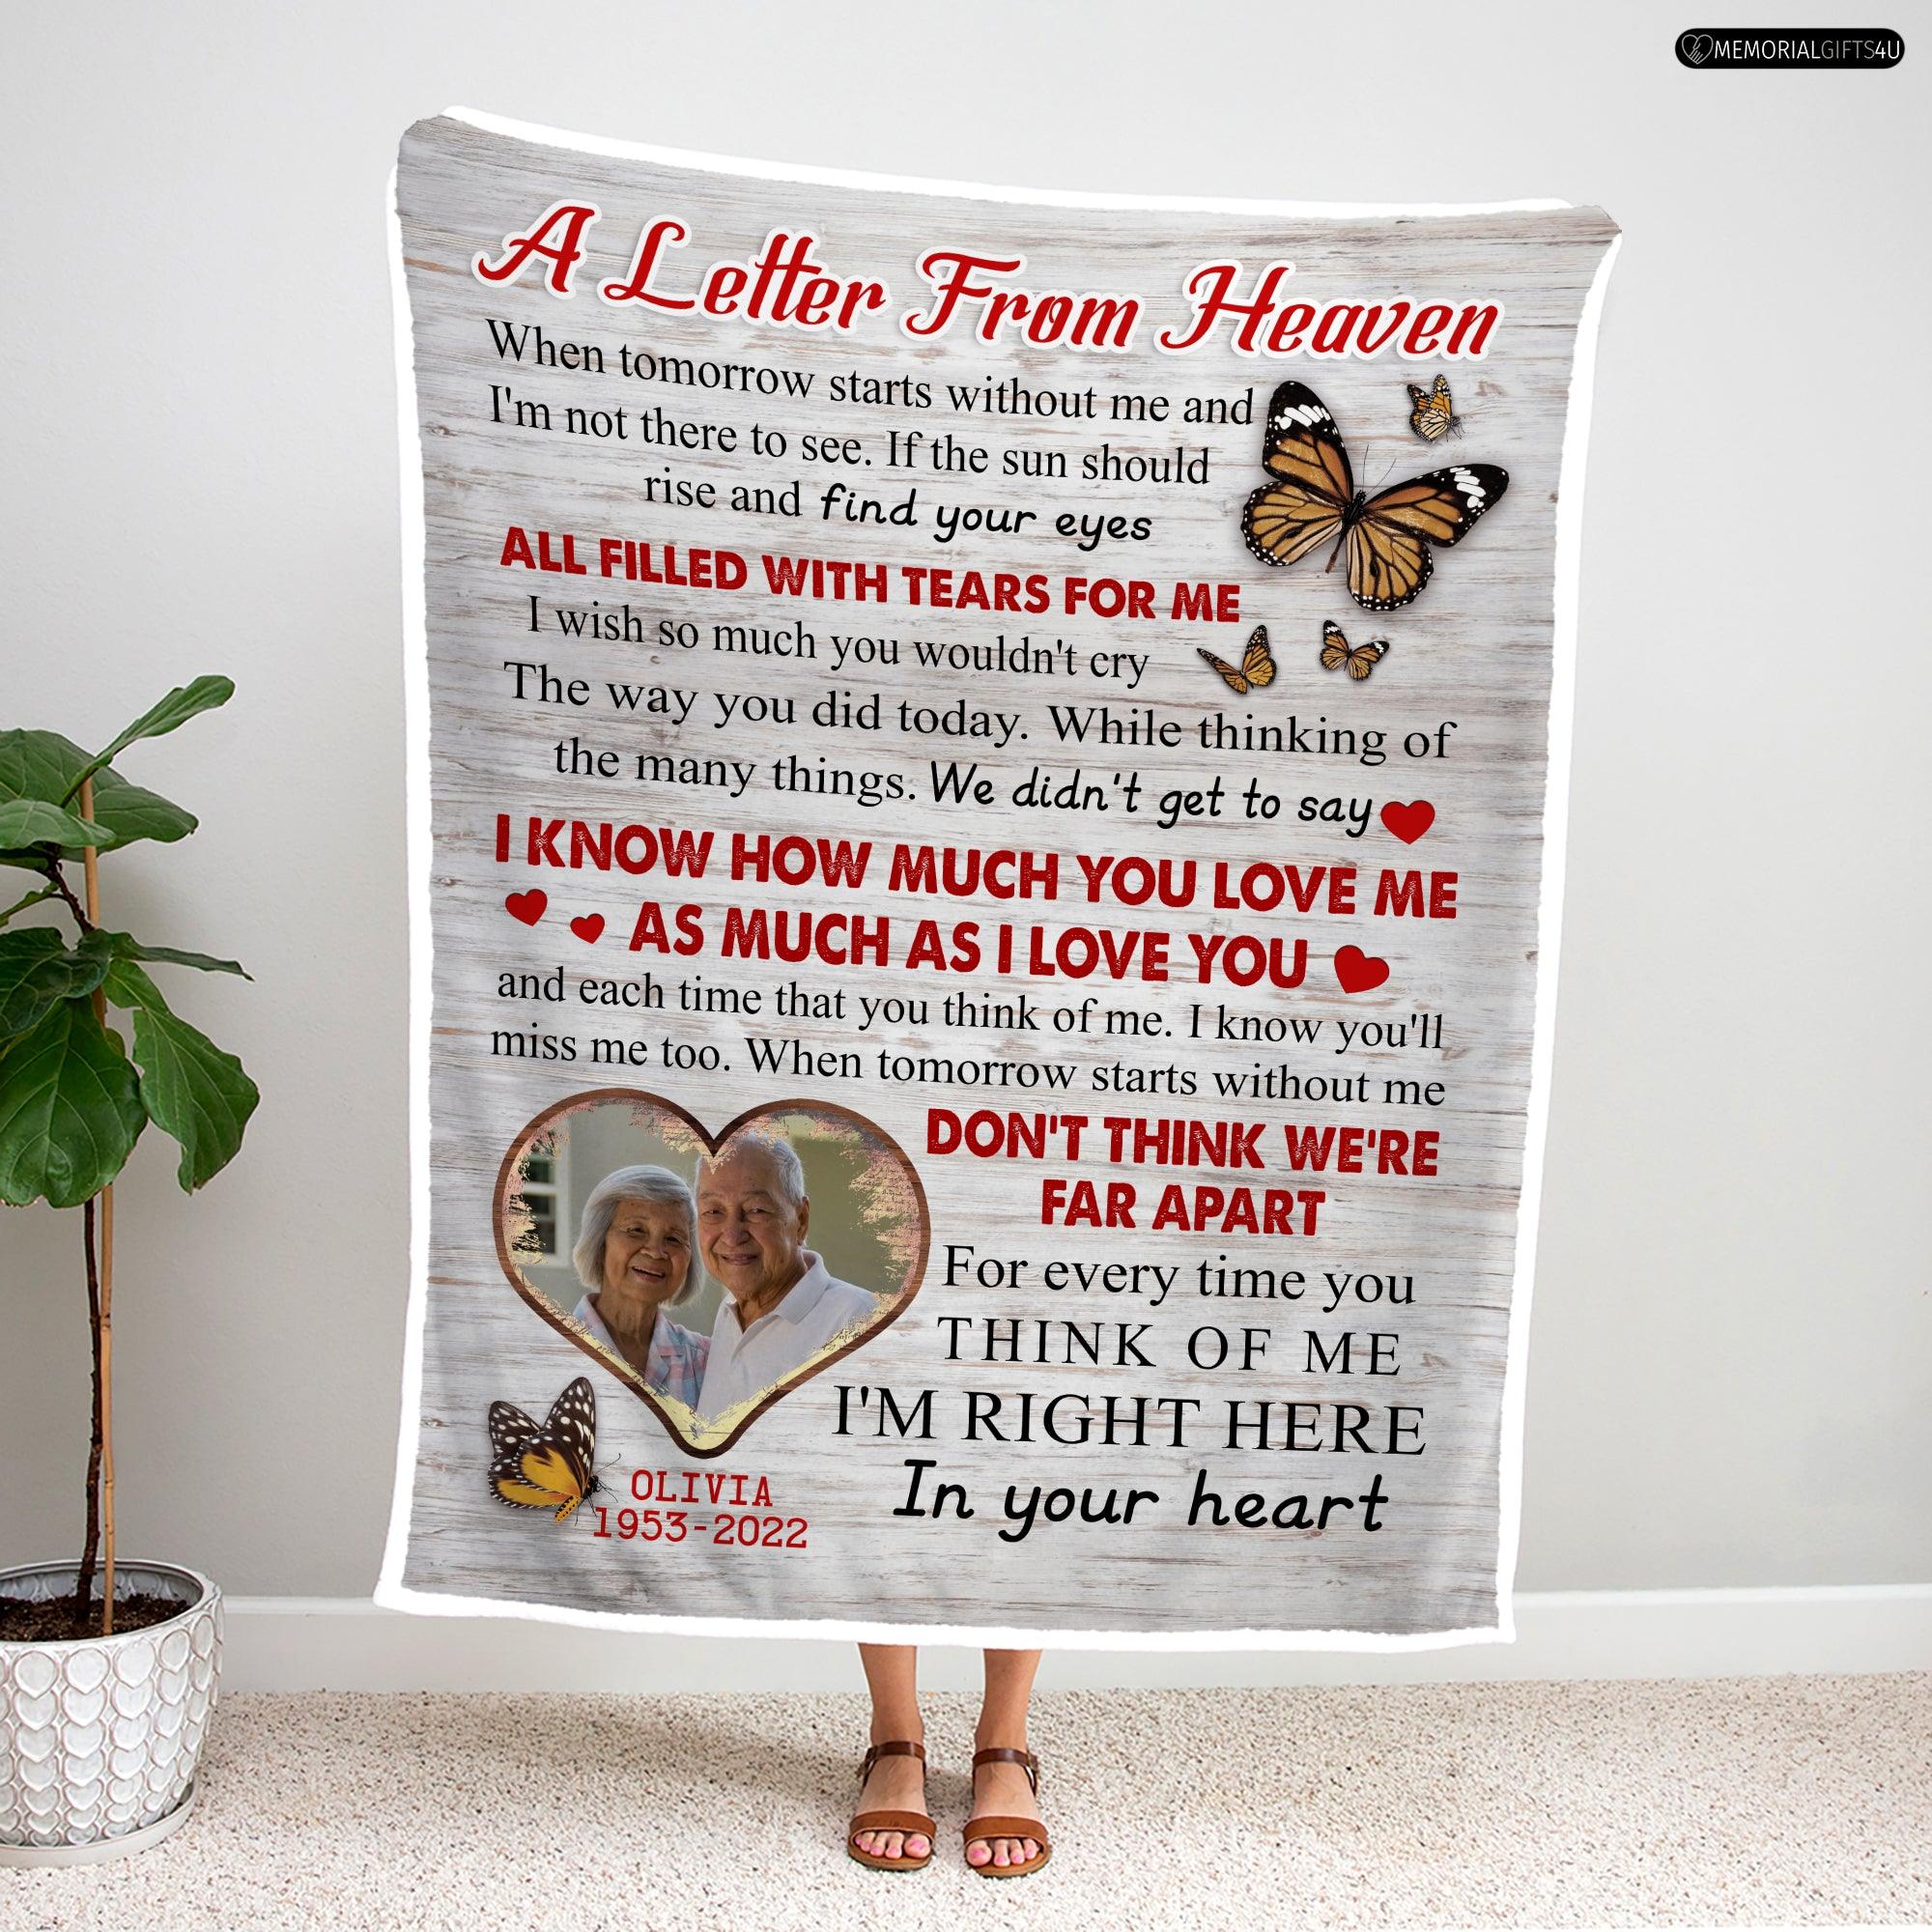 http://memorialgifts4u.com/cdn/shop/files/a-letter-from-heaven-personalized-memorial-gifts-for-loss-of-mother-fleece-blanket-memorial-gifts-4u-1-35407768682797.jpg?v=1693185432